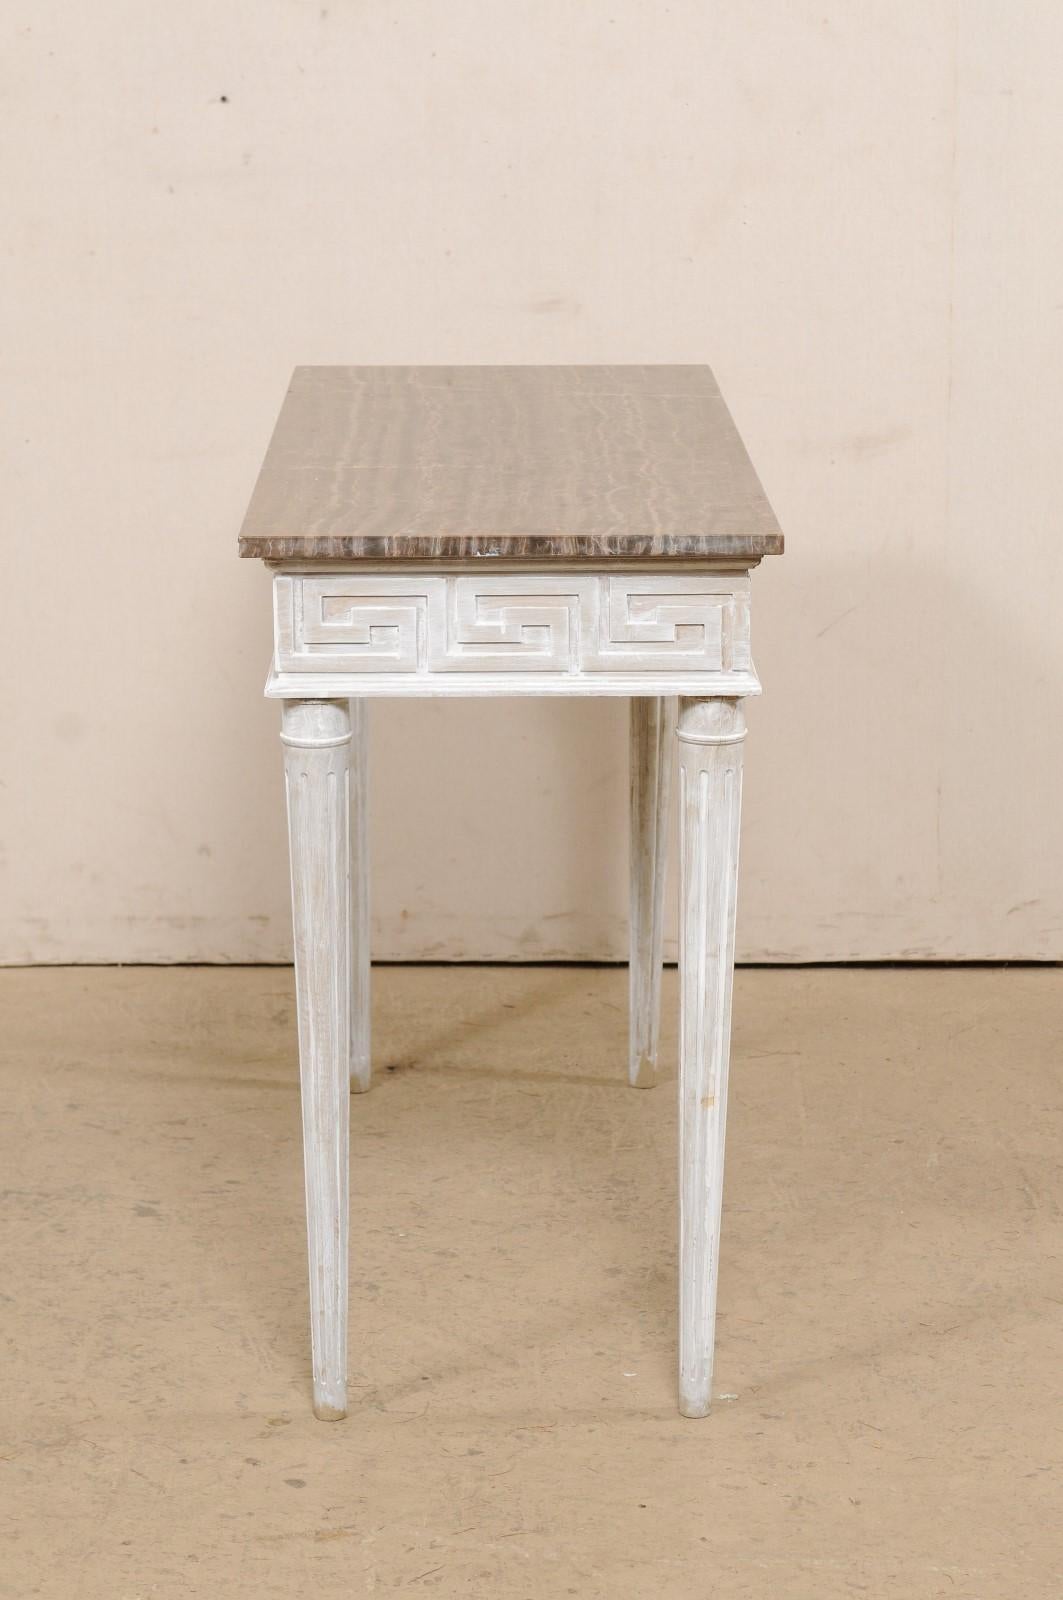 20th Century Marble Top Console Table with Greek Key Motif Carved Skirt on All Sides